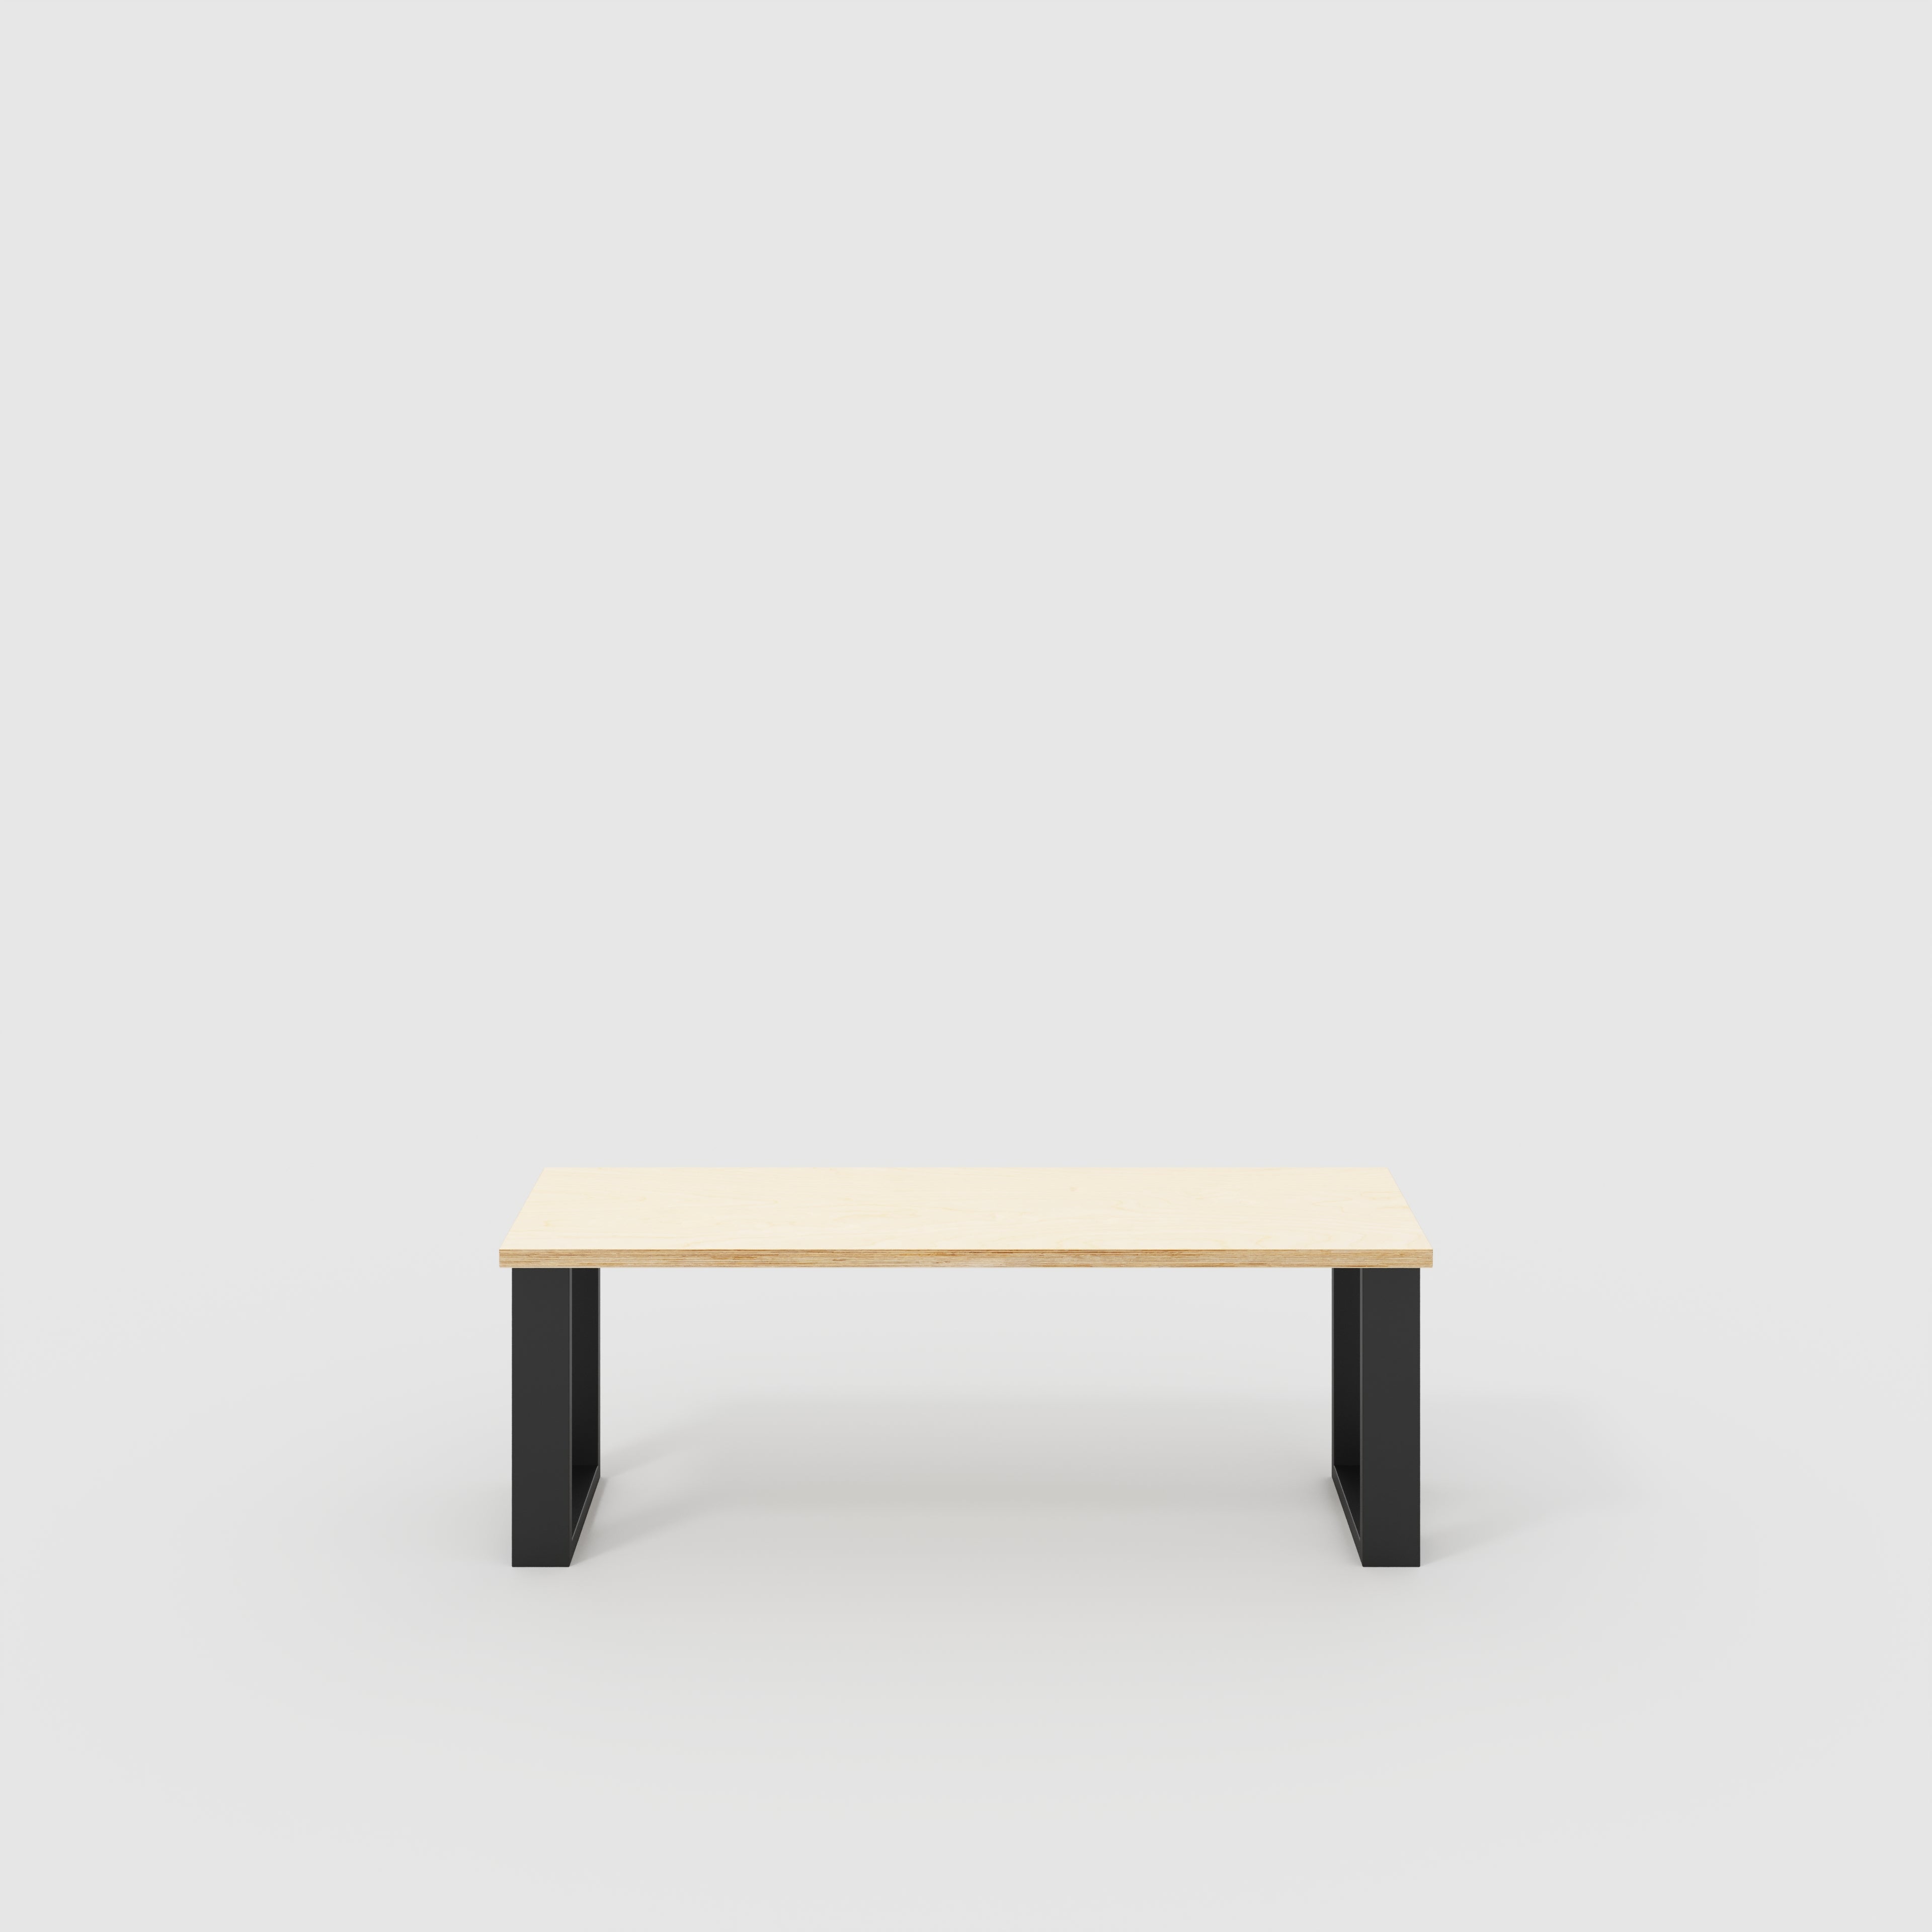 Bench Seat with Black Industrial Legs - Plywood Birch - 1200(w) x 400(d)